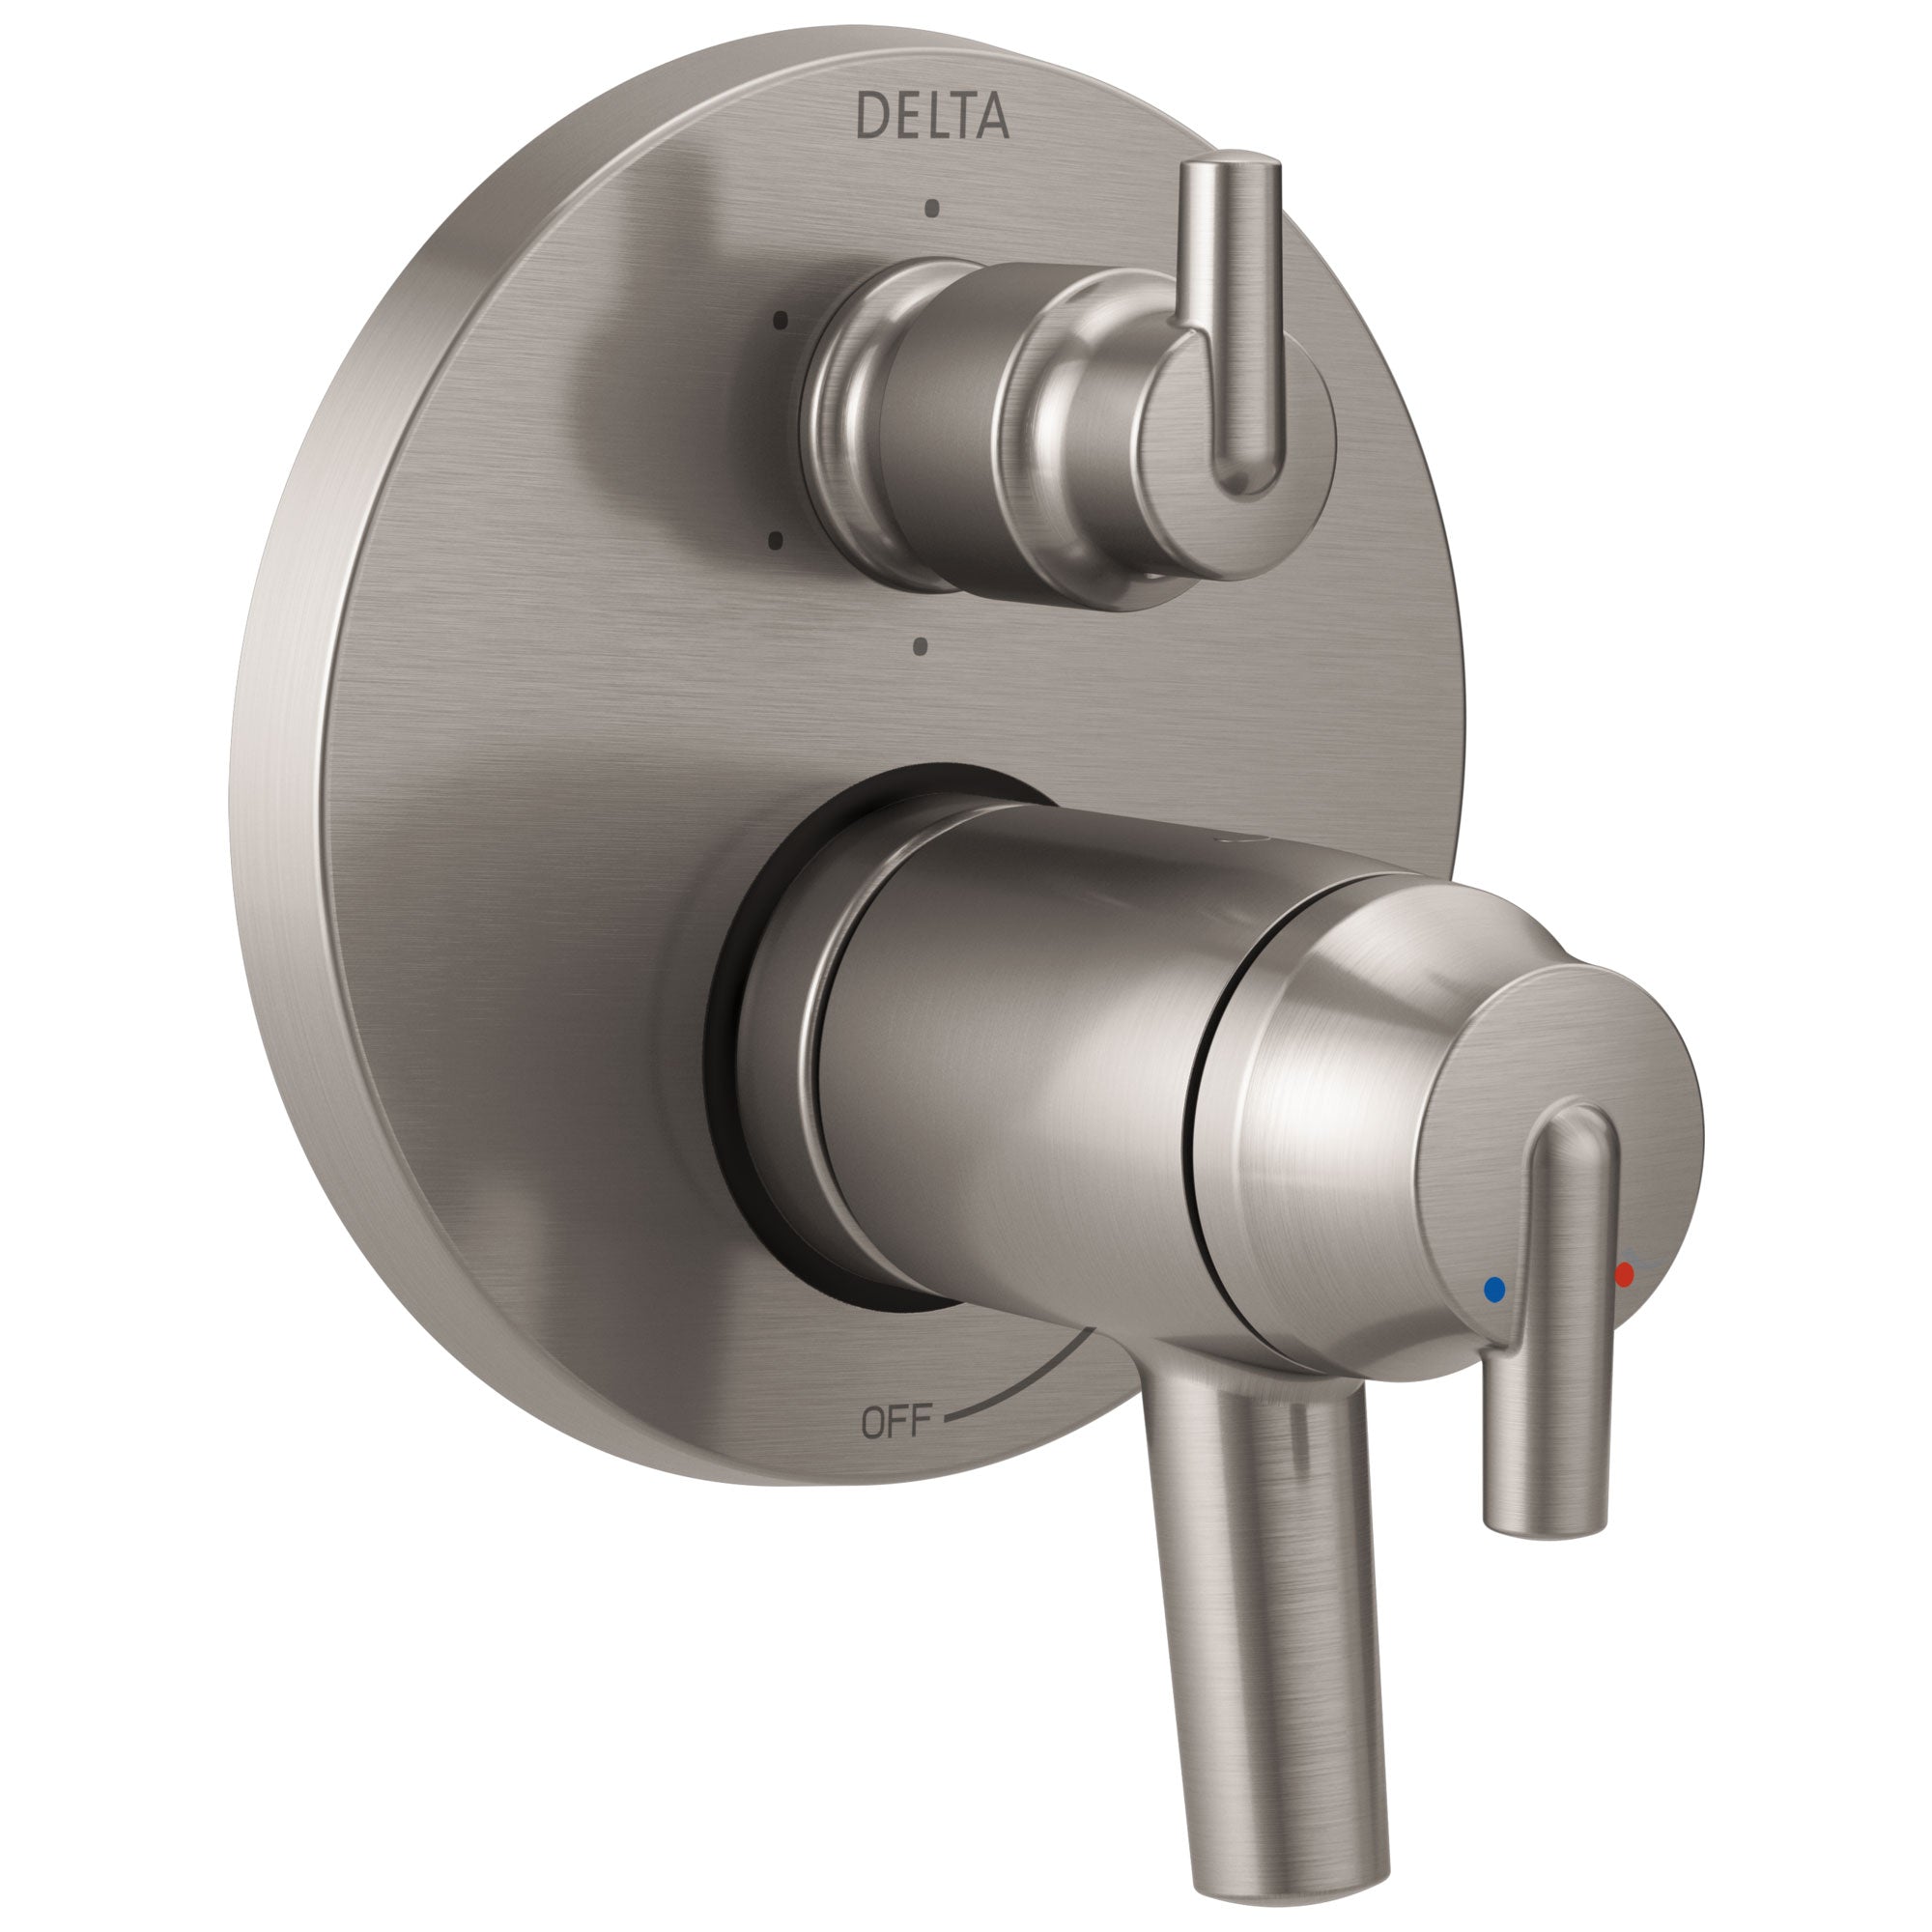 Delta Trinsic Collection Stainless Steel Finish Thermostatic Shower Faucet Control with 6-Setting Integrated Diverter Trim (Requires Valve) DT27T959SS